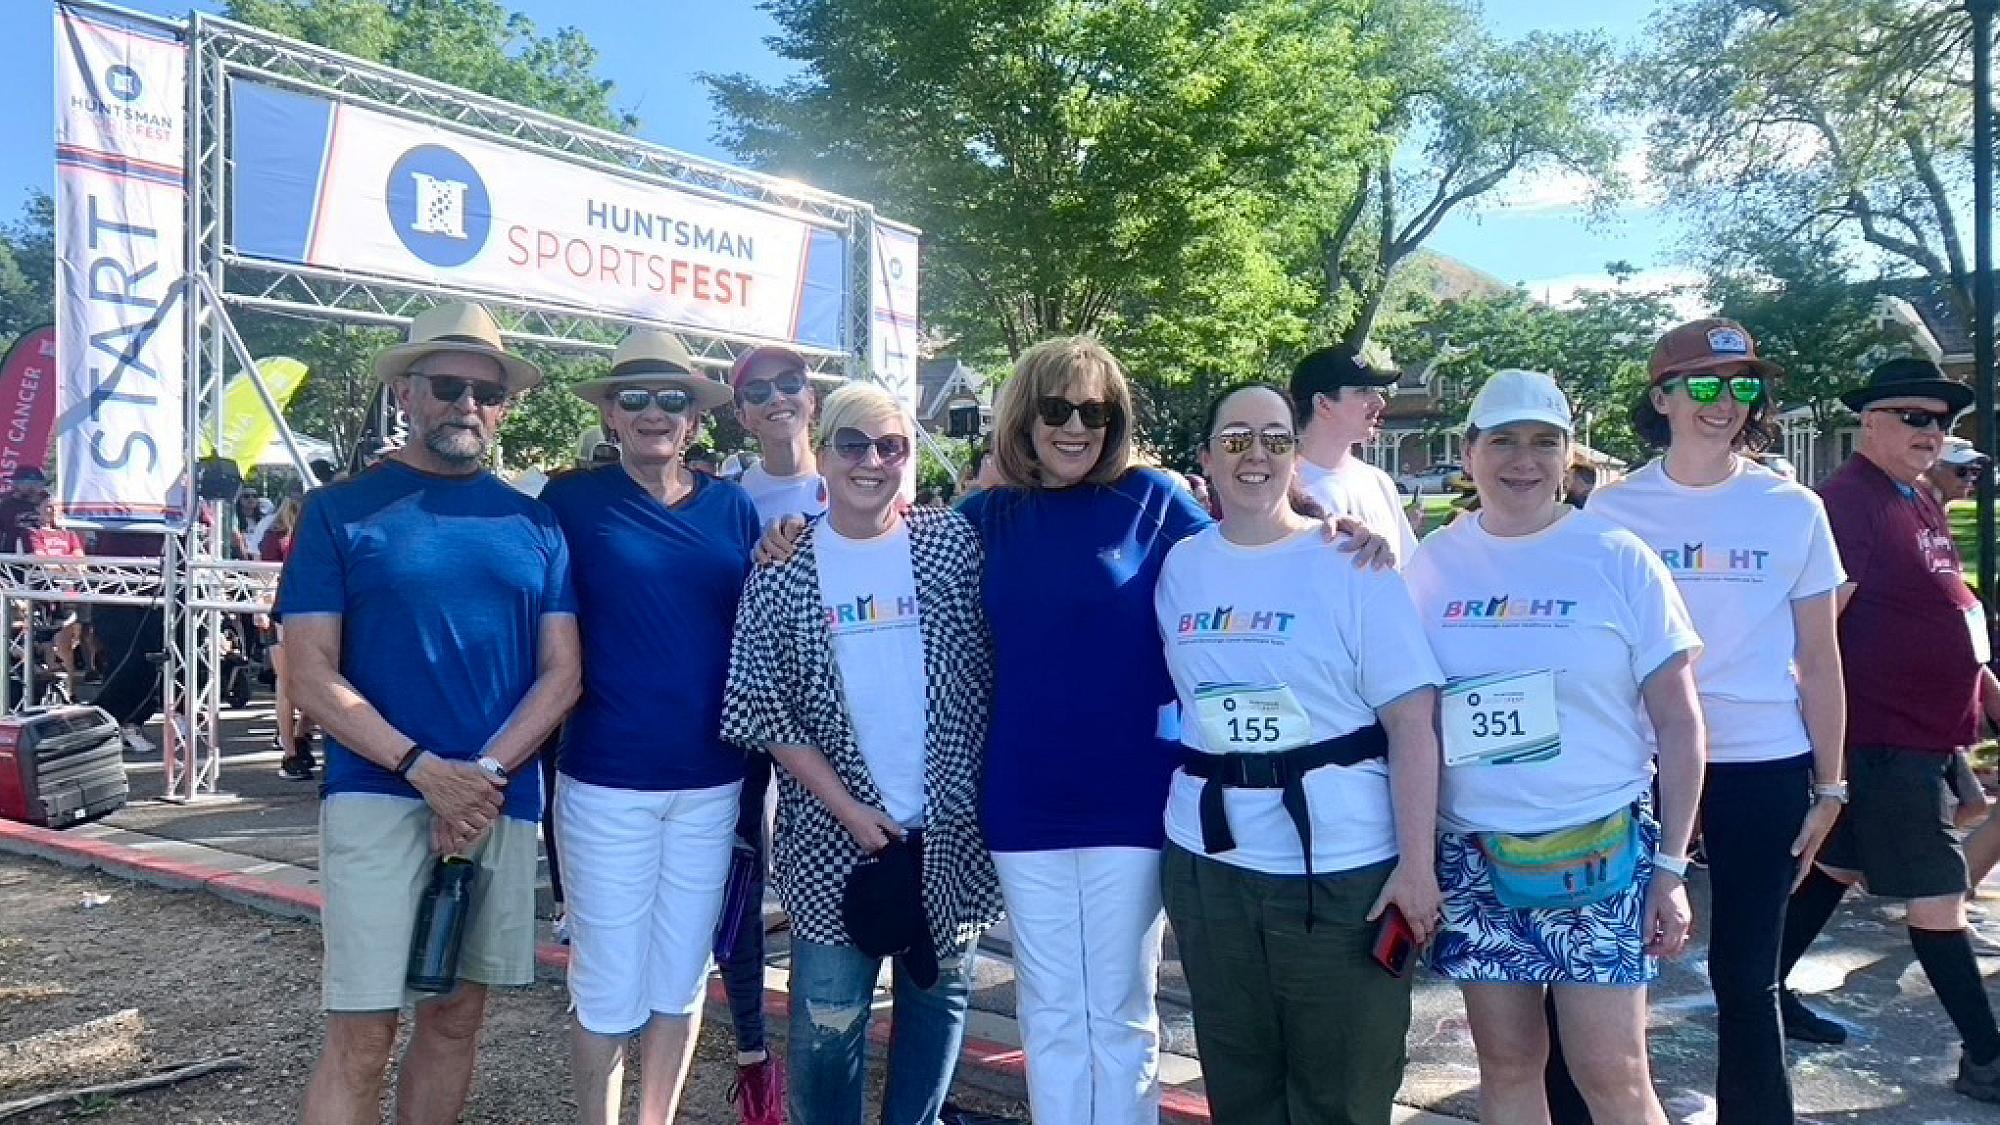 Advocates participated in the 2023 Huntsman SportsFest to raise funds. (Left to right) Brittany Lee; Carla Lloyd; Cindy Matsen, MD; and Jen Doherty, PhD.